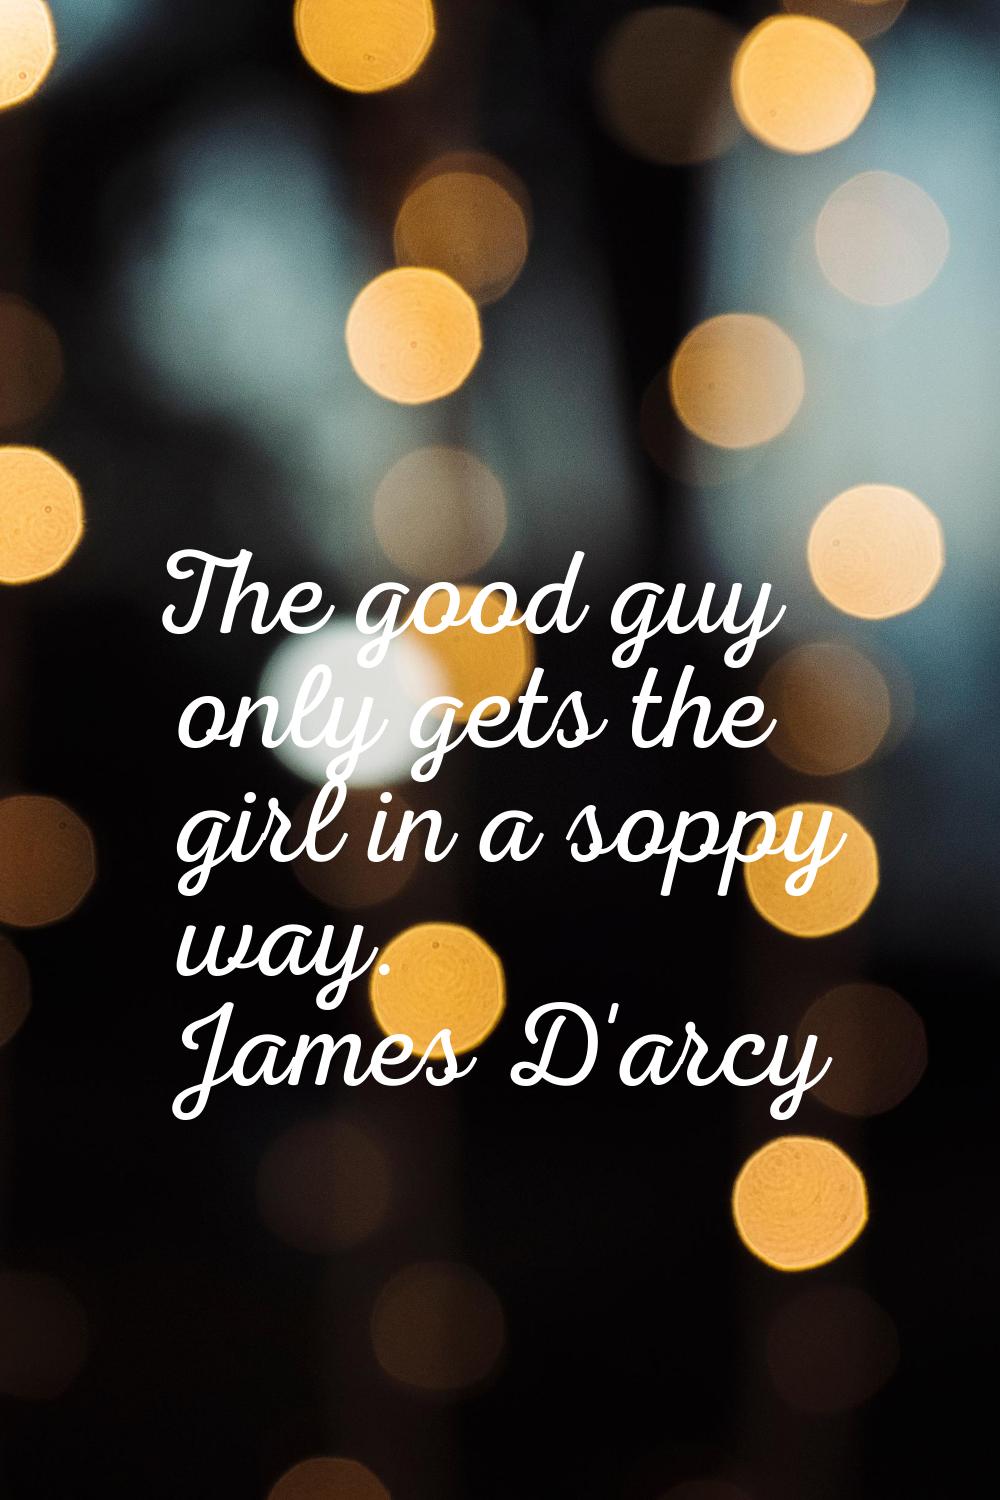 The good guy only gets the girl in a soppy way.